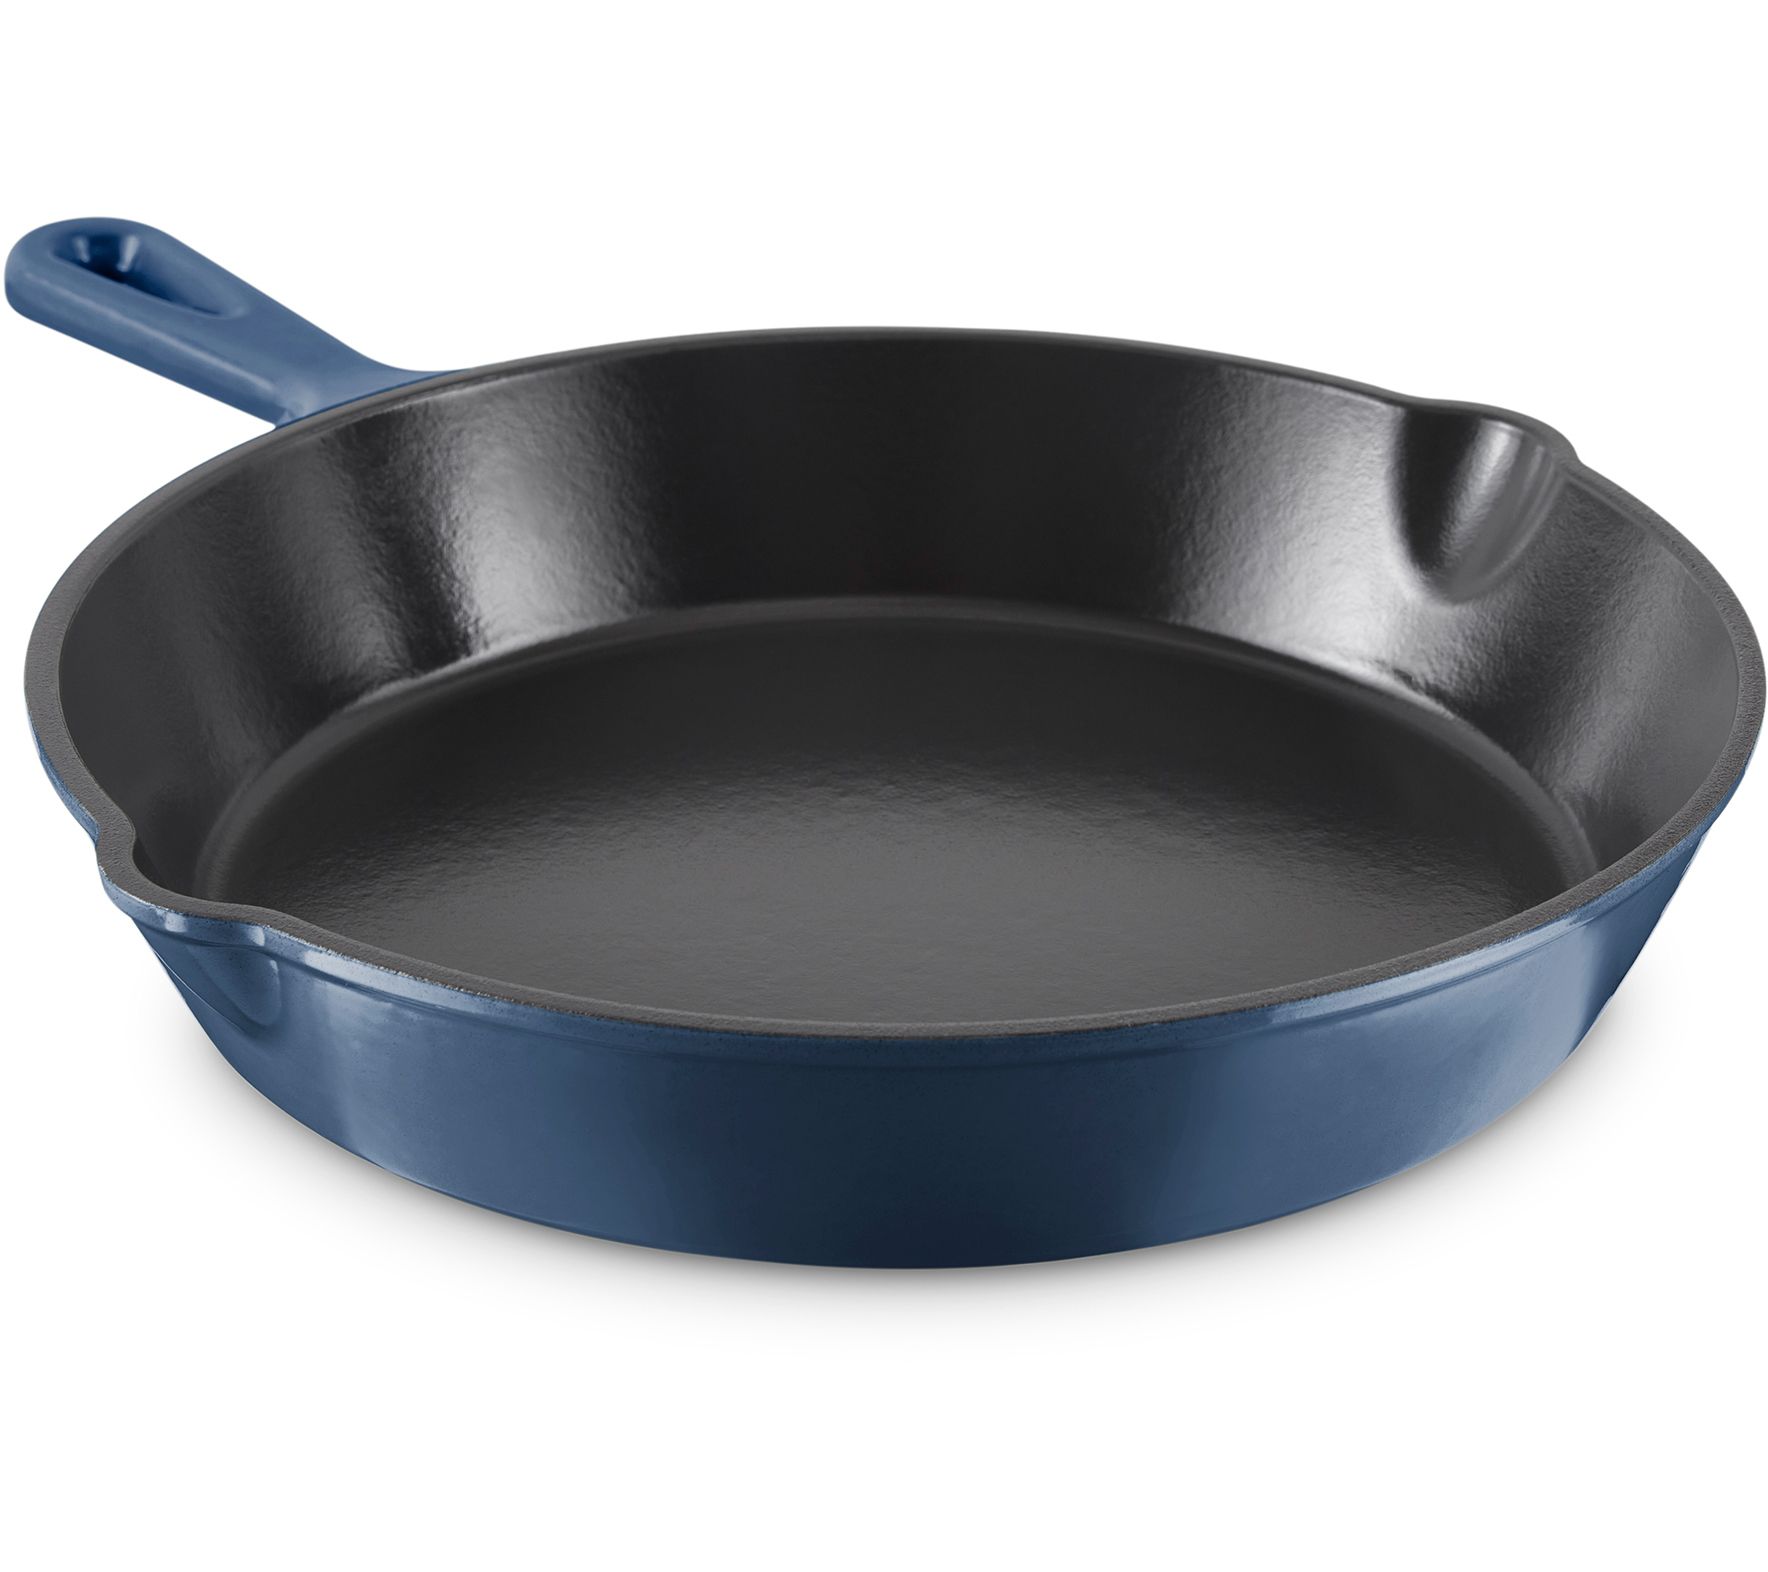 Zakarian 10.5 All Purpose Cast Iron Pan - household items - by owner -  housewares sale - craigslist